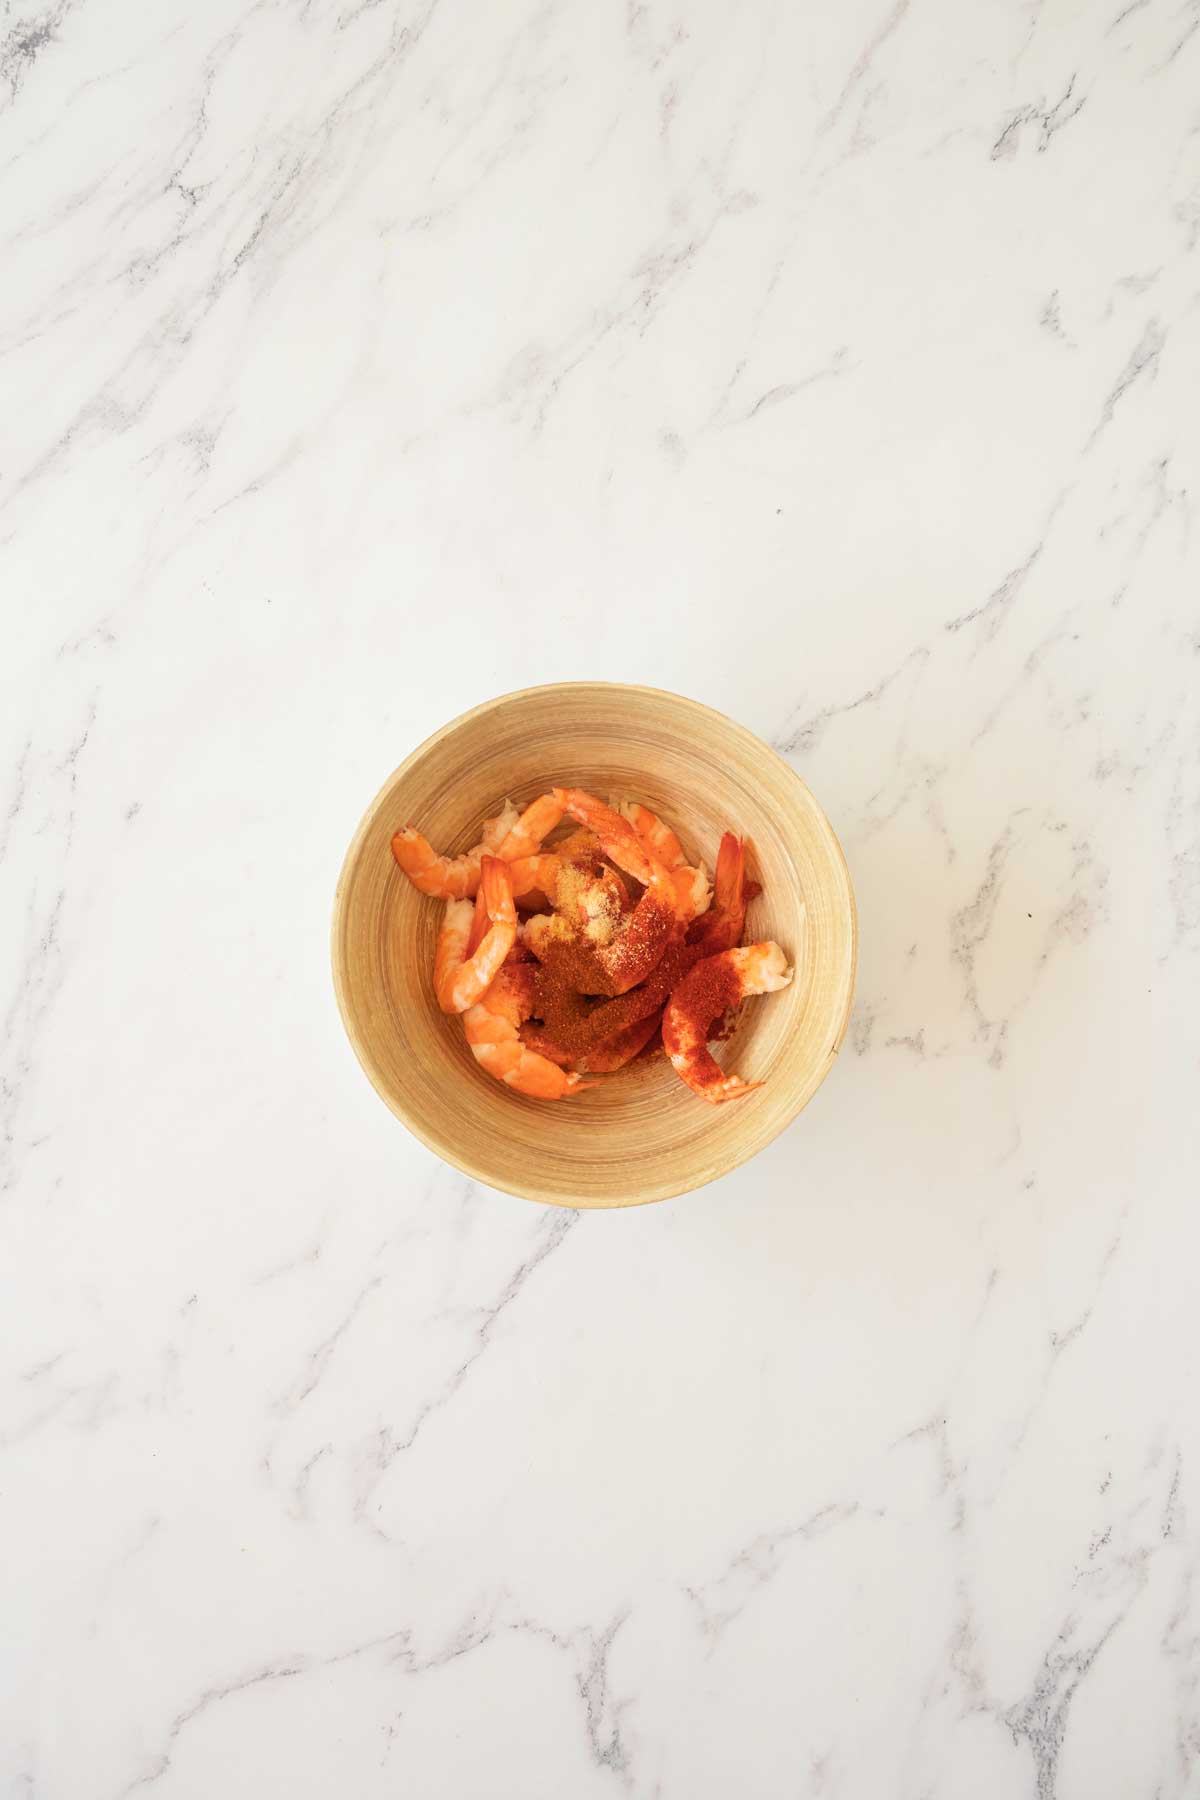 A wooden bowl filled with cooked shrimp seasoned with spices sits on a marble surface.